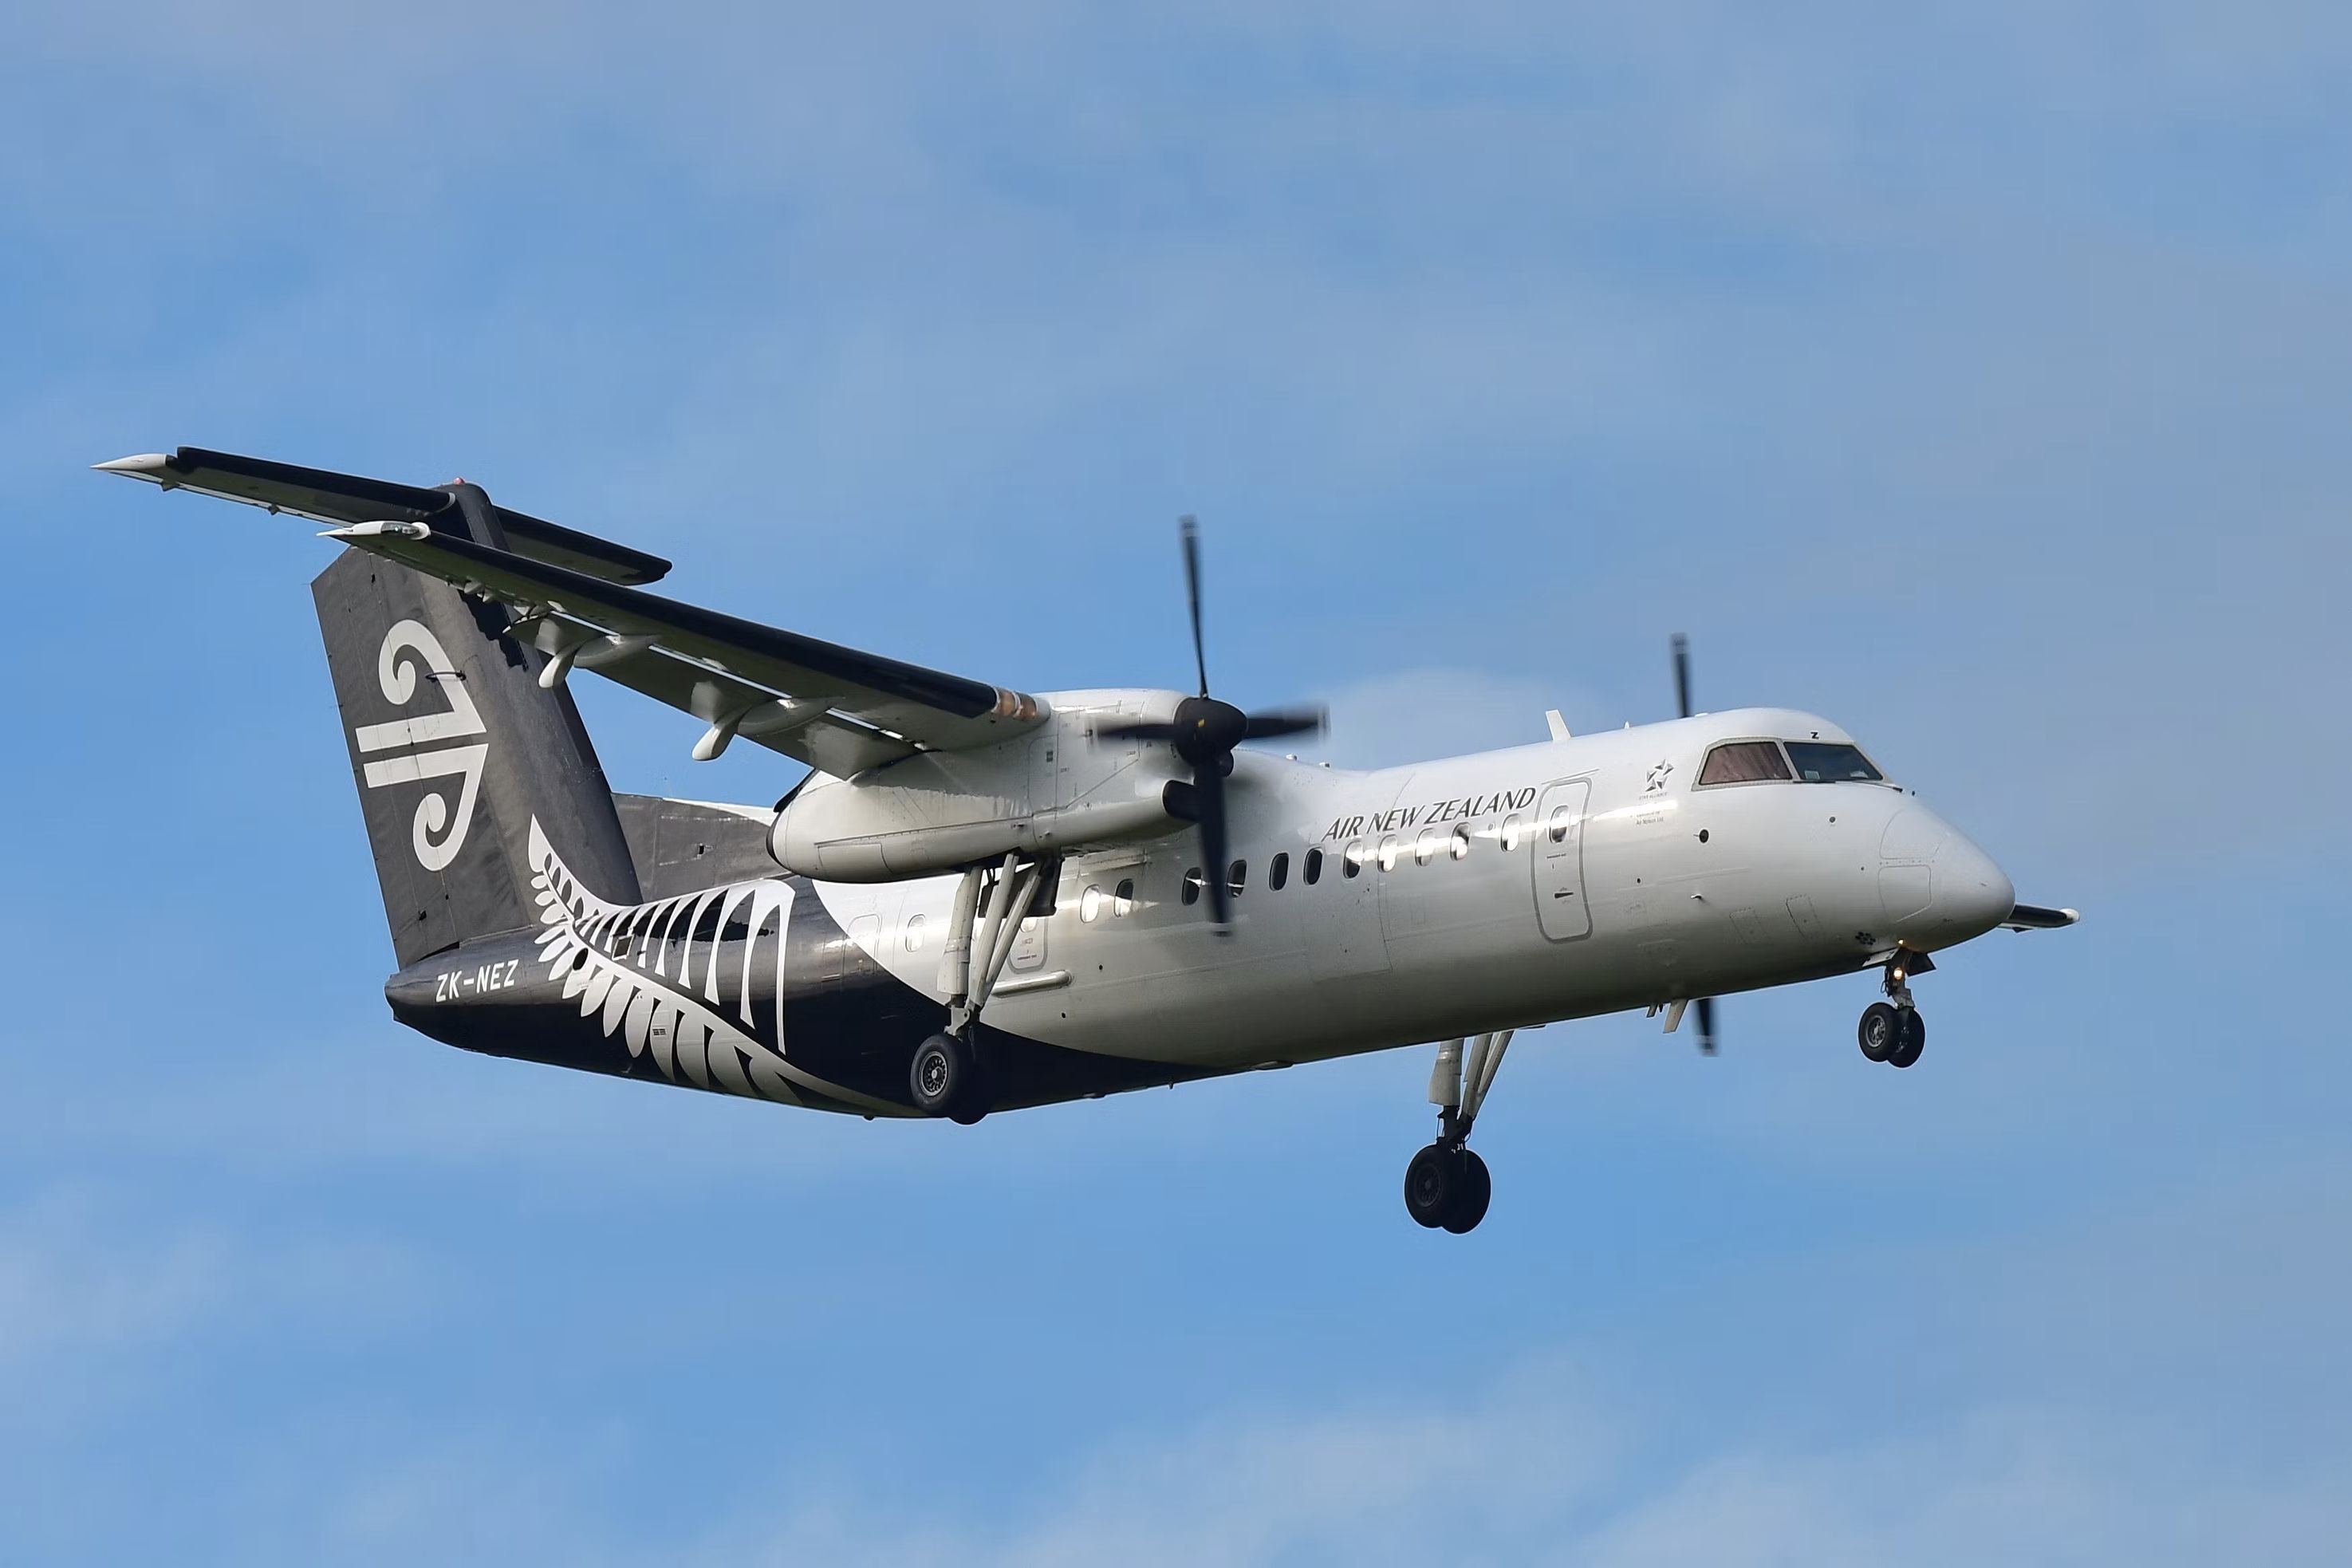 An Air New Zealand Bombardier Dash 8 Q300 flying in the sky.